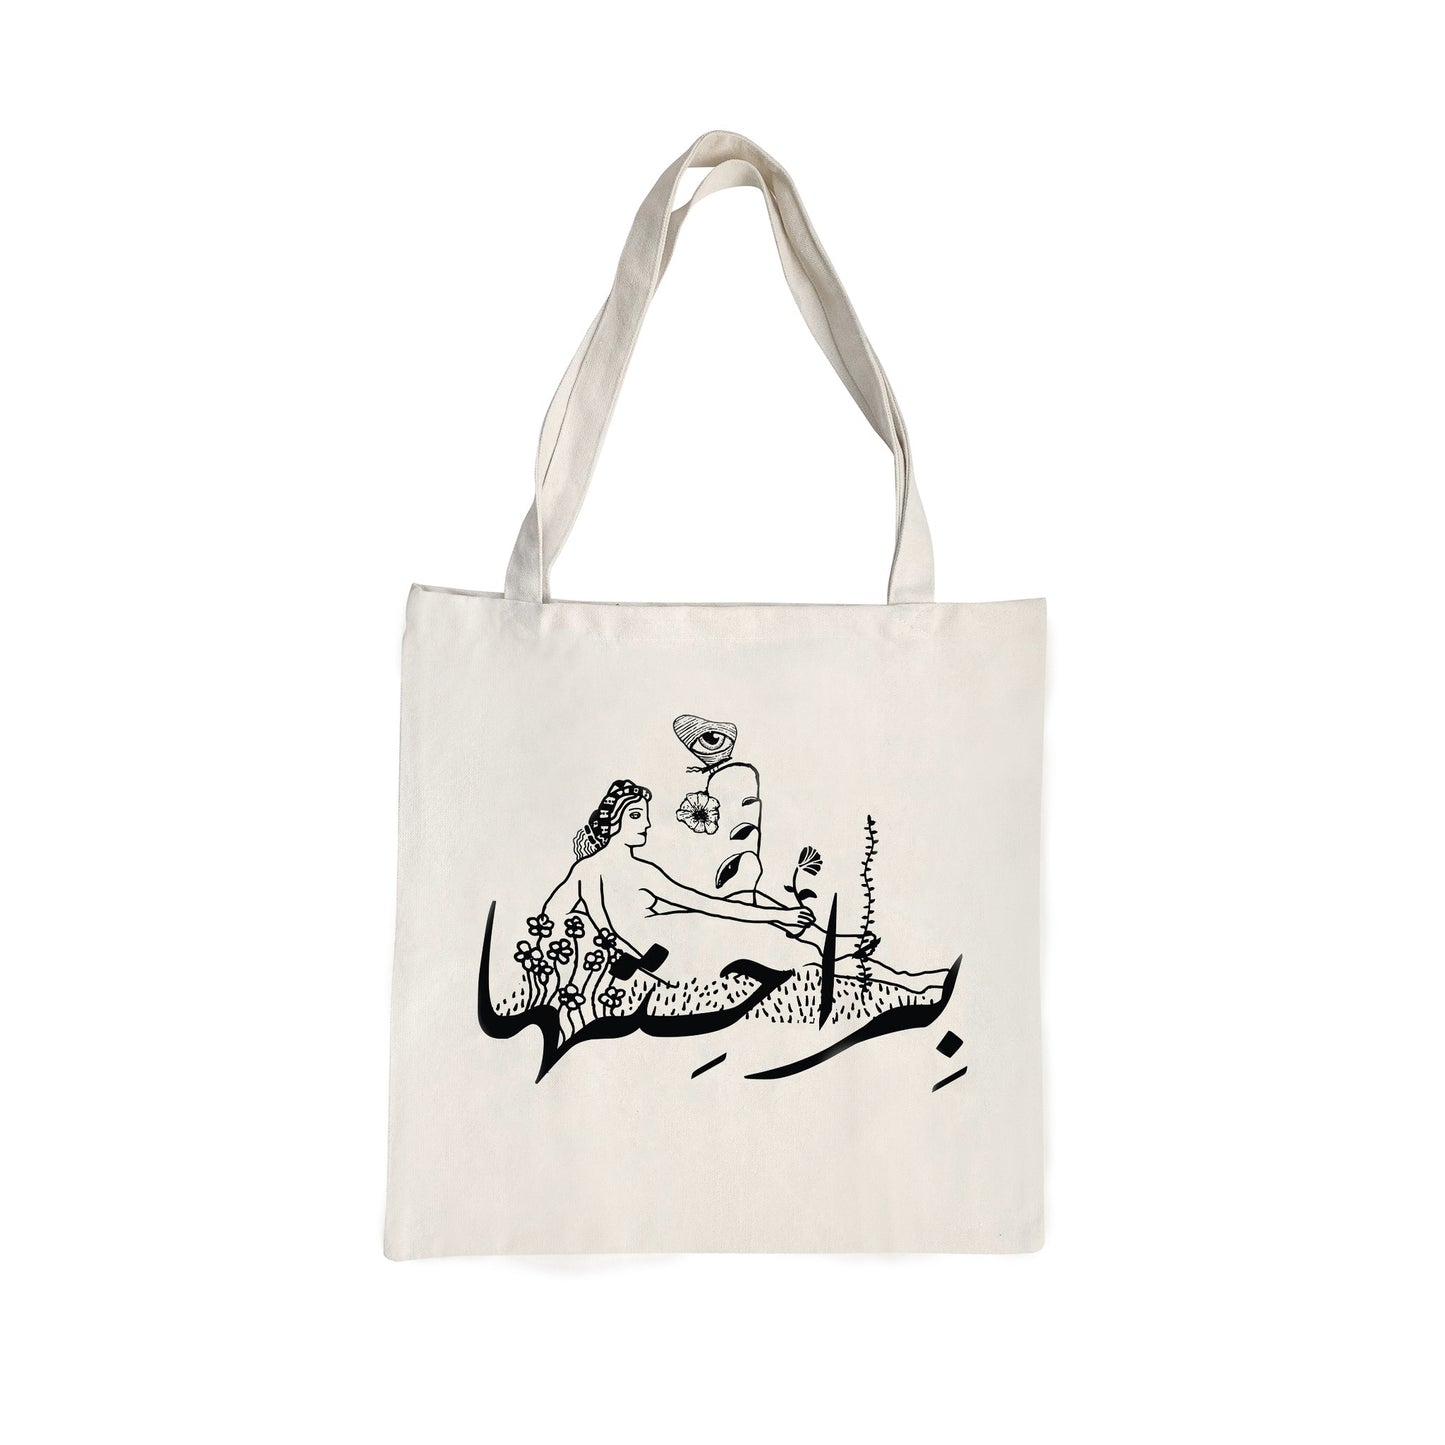 The Virtue and Vice Tote Bag